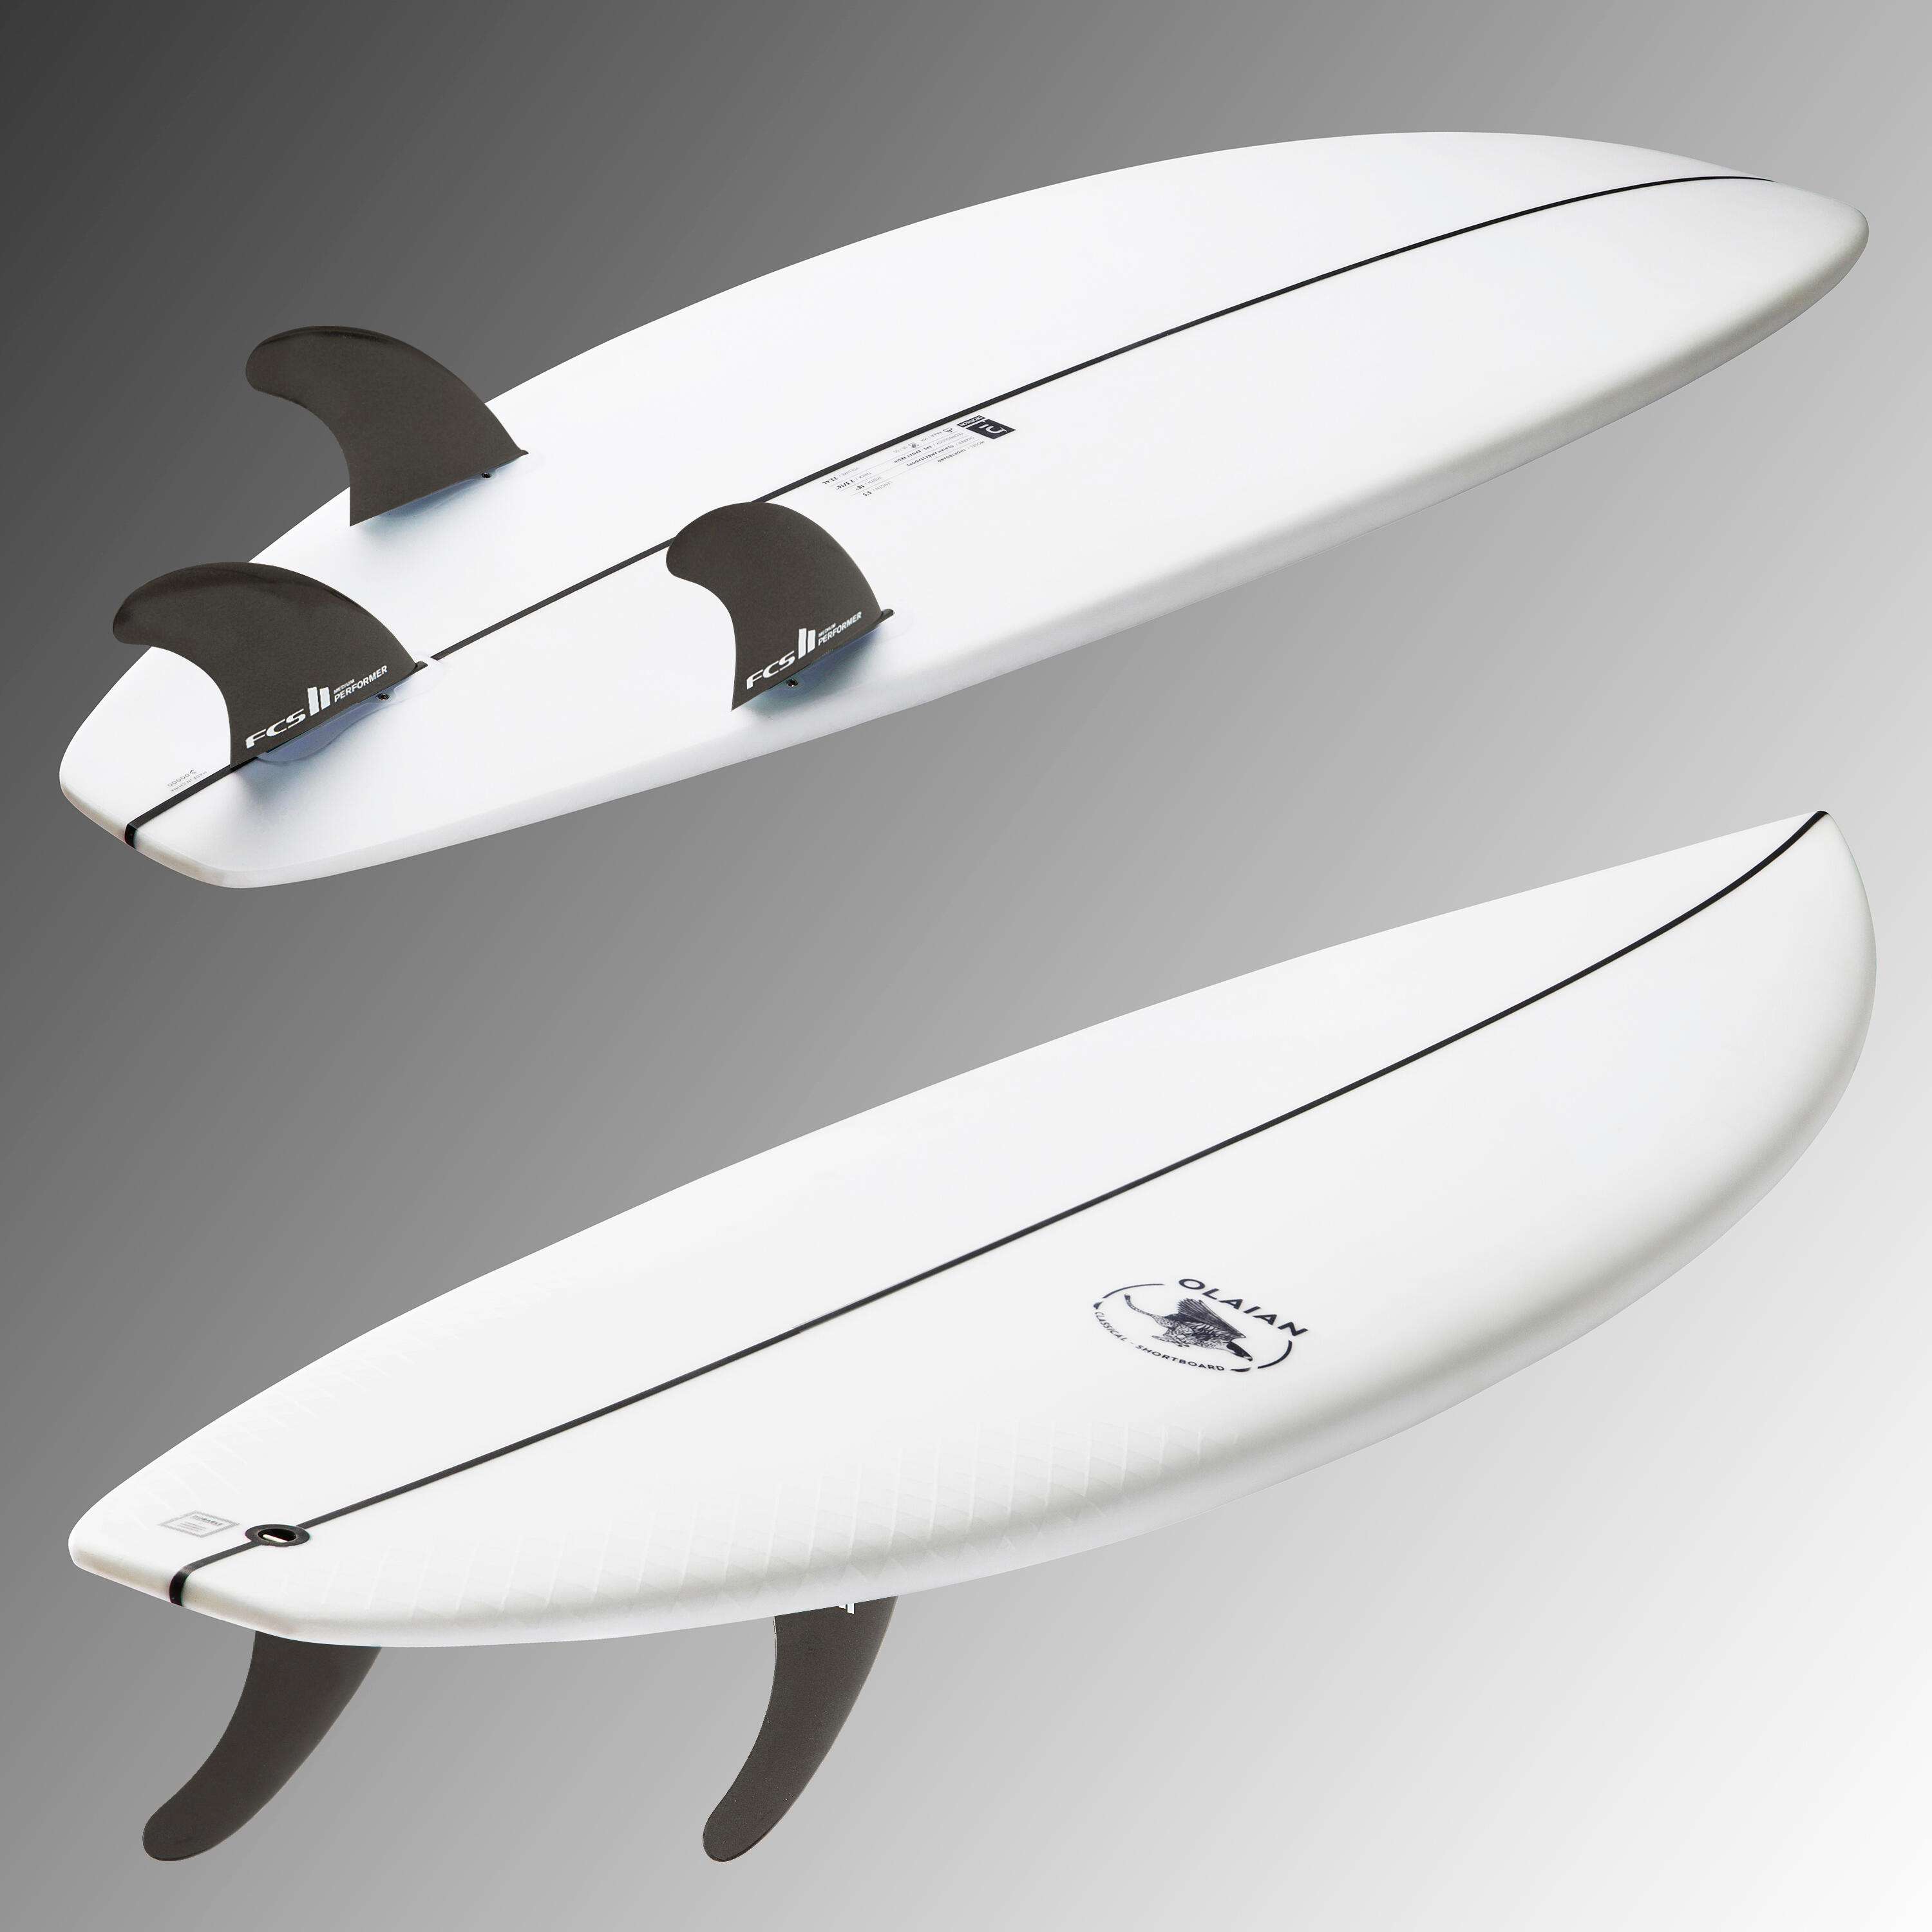 SHORTBOARD 900 5'5" 24 L. Supplied with 3 FCS2 fins 5/14